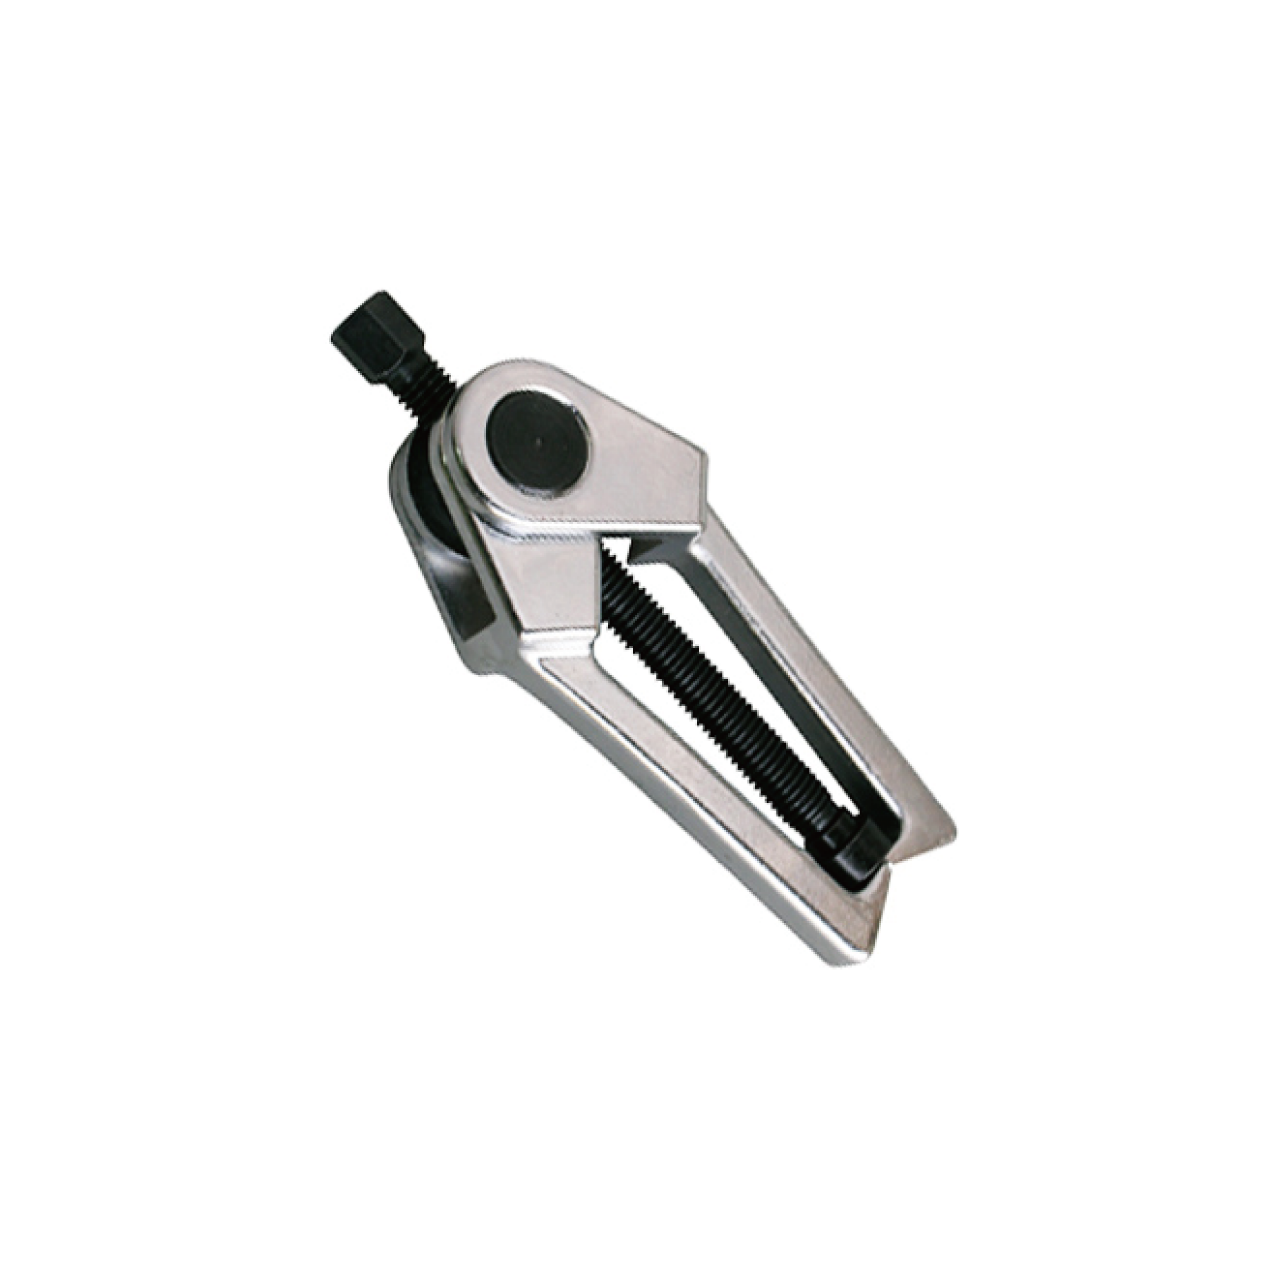 OUTER TIE ROD REMOVER